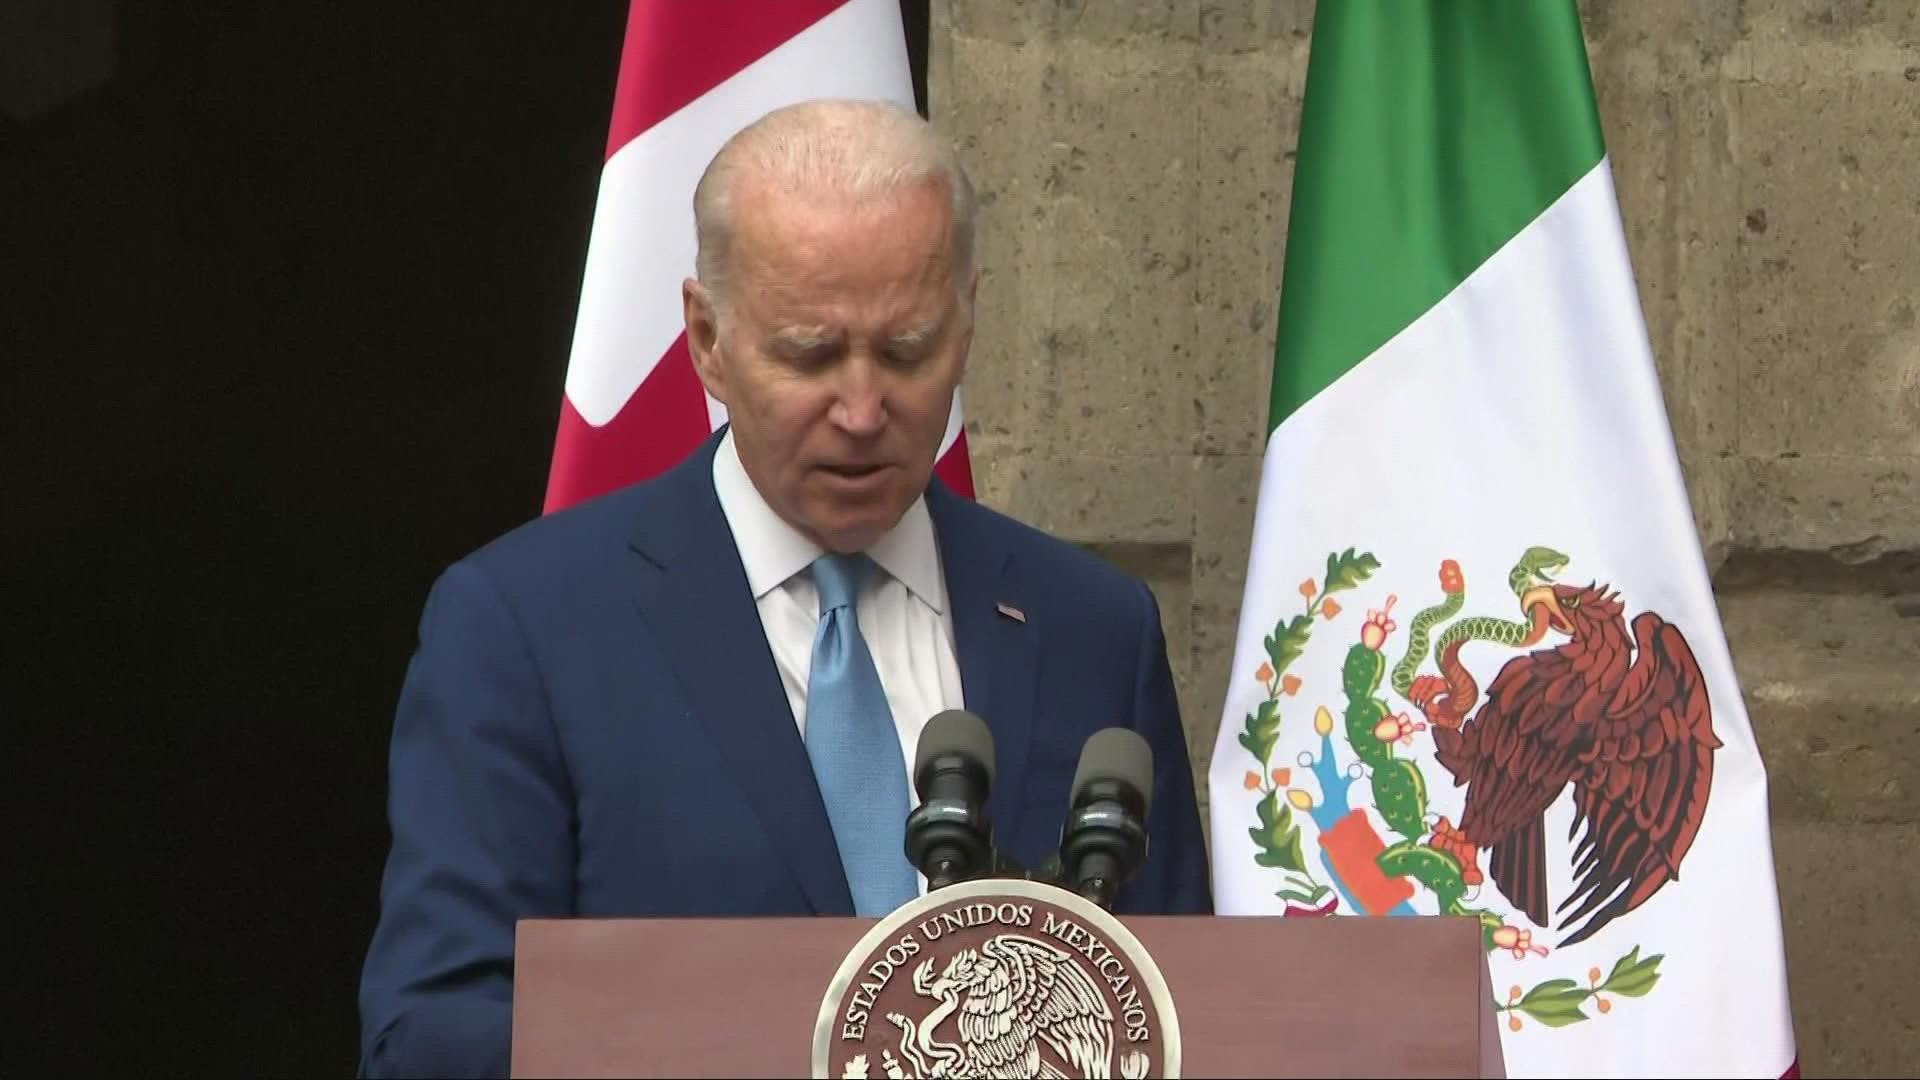 President Biden says he was surprised when informed that government records were found by his attorneys at his former office space in Washington